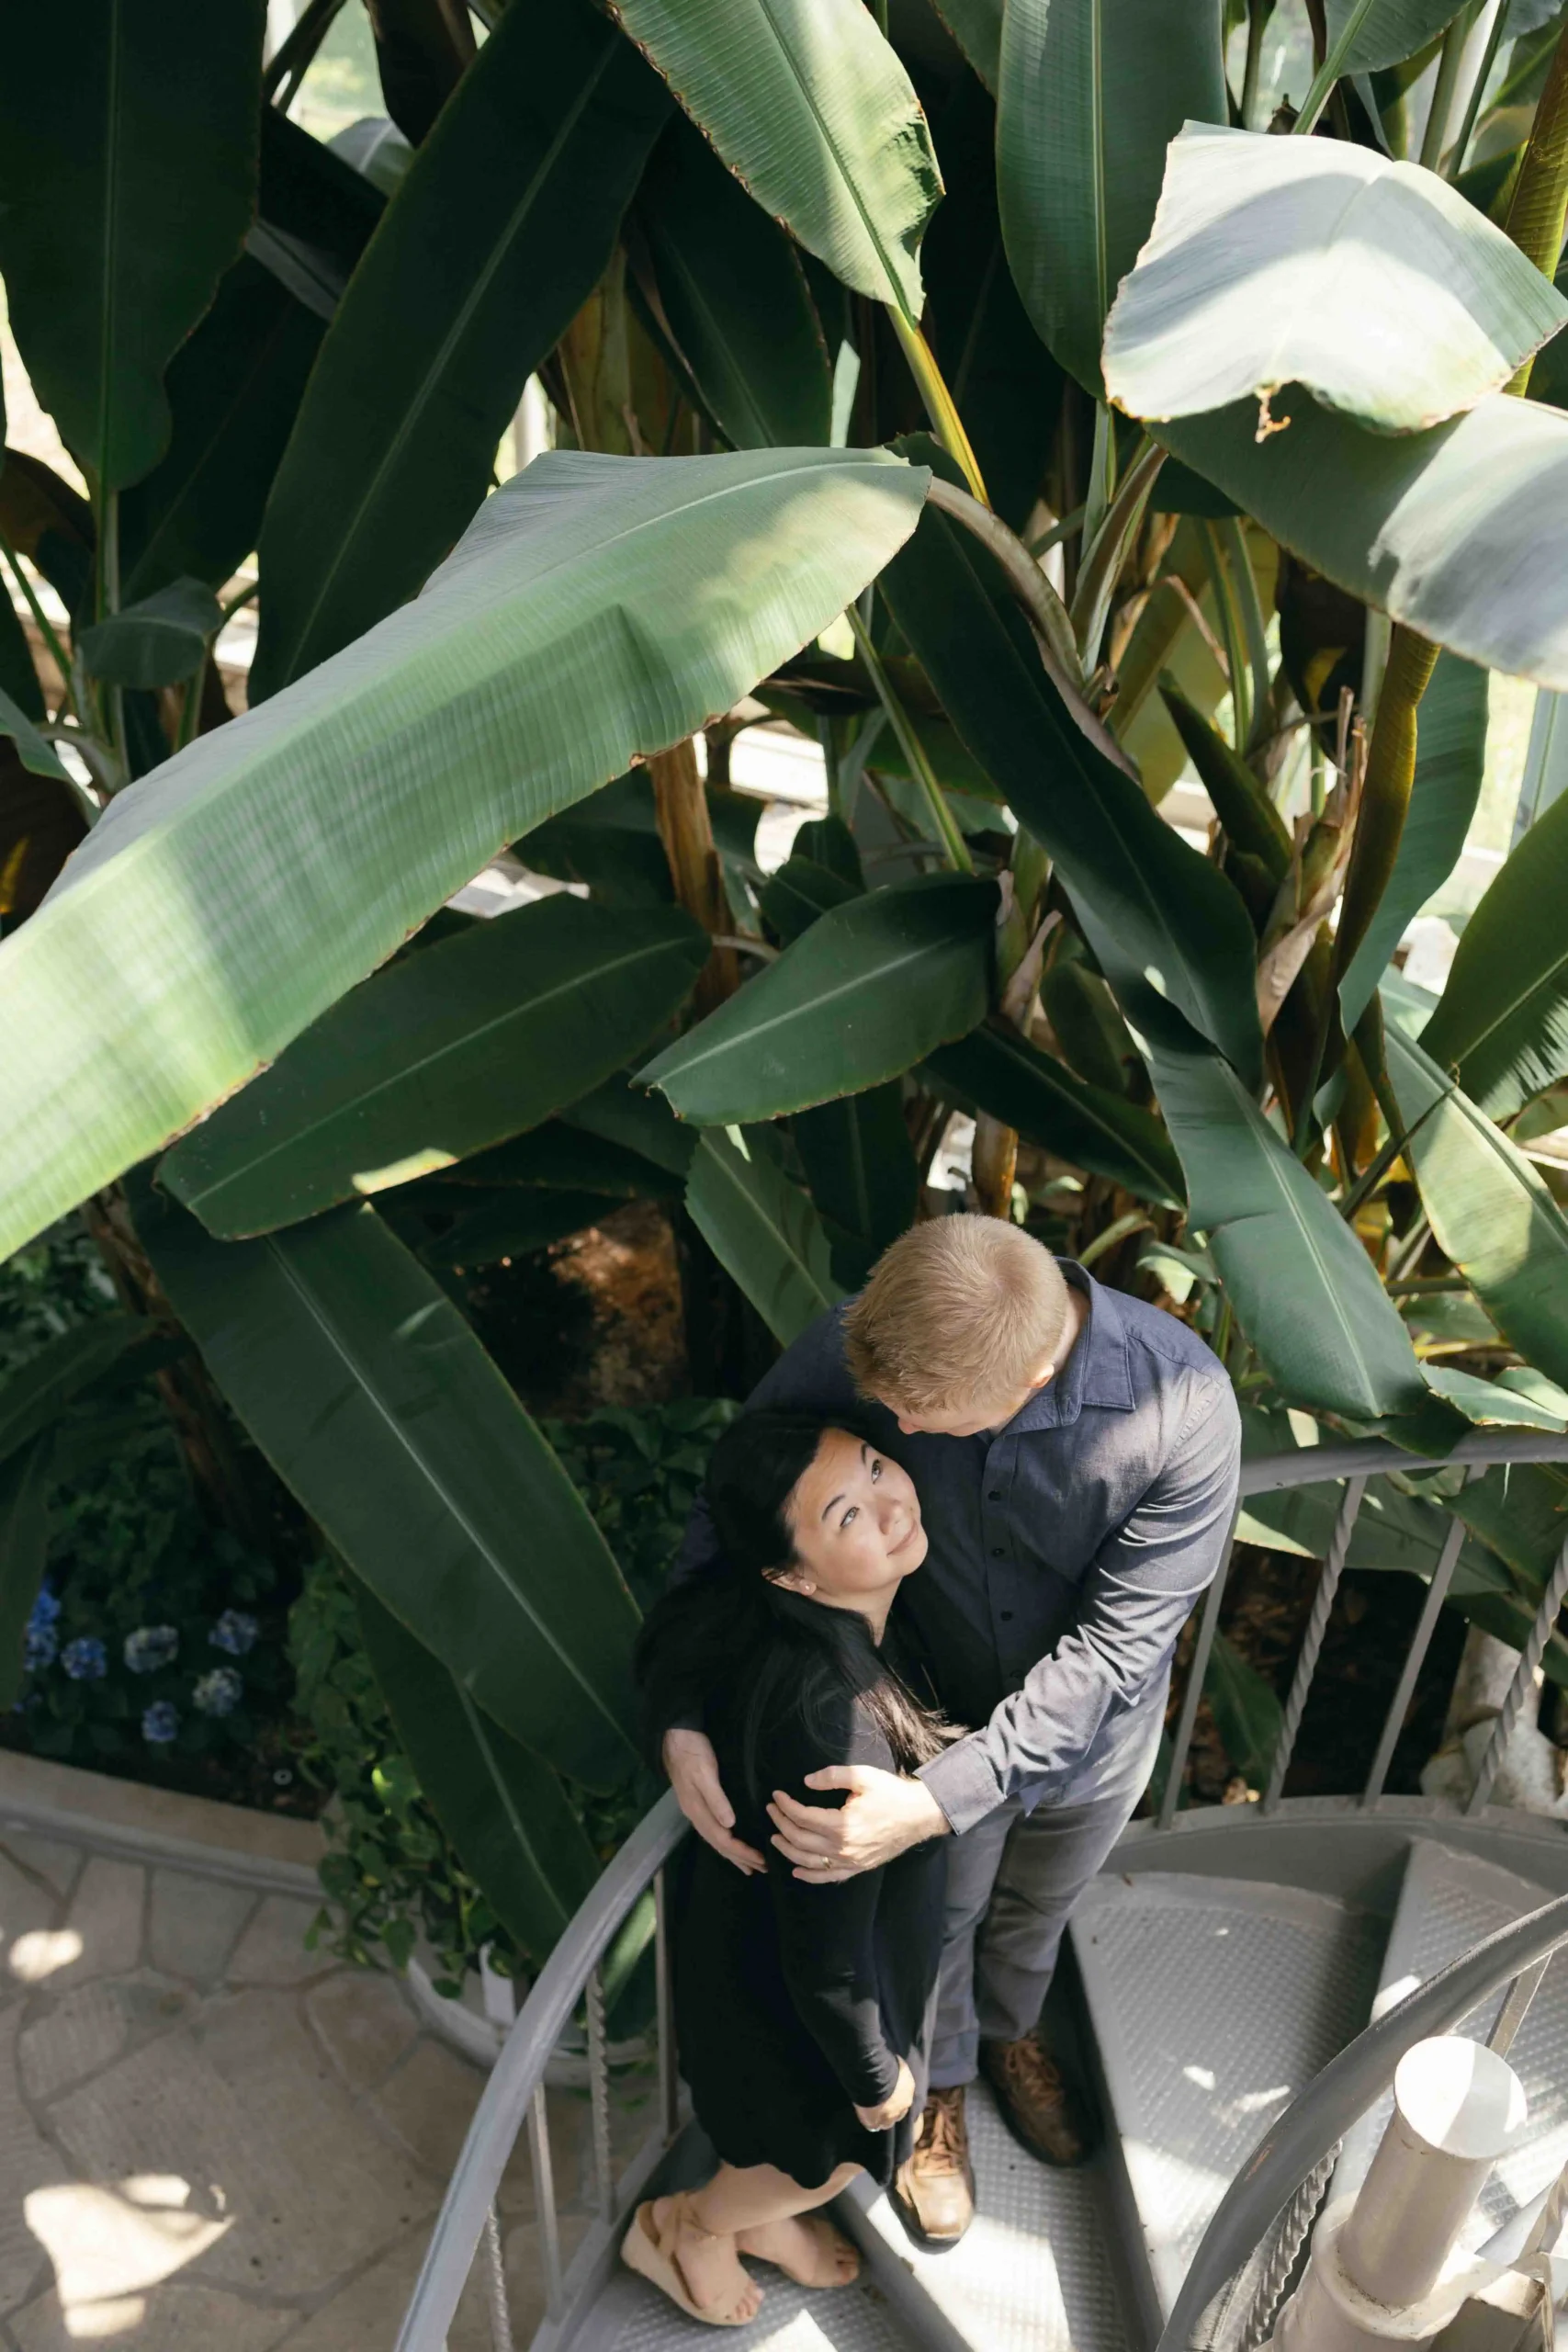 A couple embracing on a spiral staircase inside a greenhouse surrounded by tropical plants, shot by Stacey Vandas with a documentary photography style.